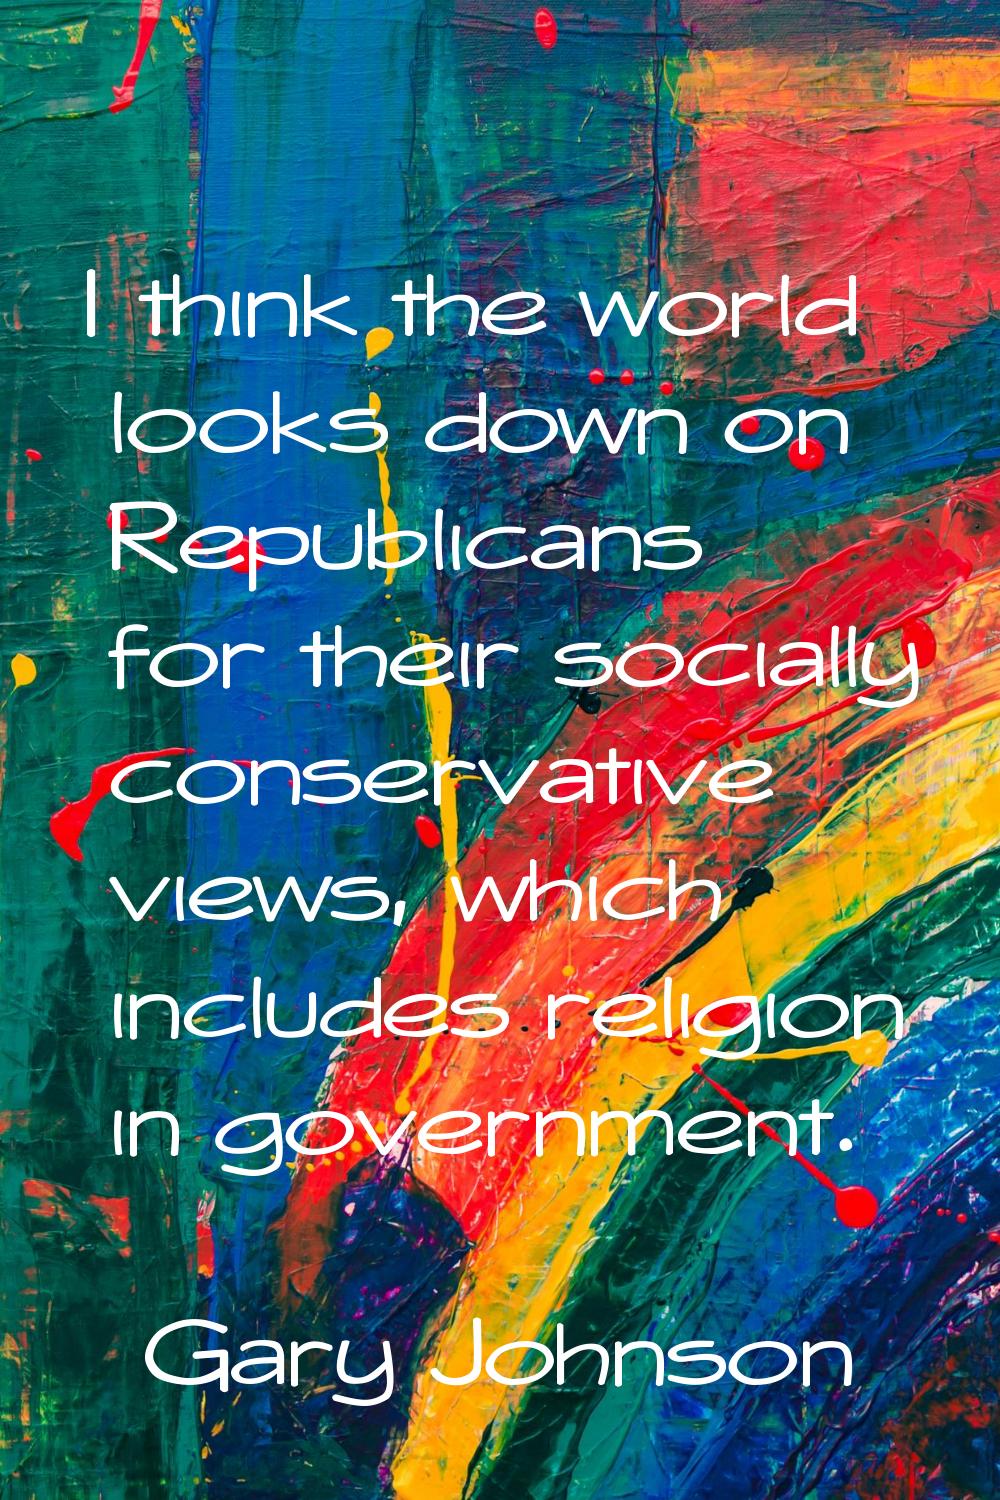 I think the world looks down on Republicans for their socially conservative views, which includes r